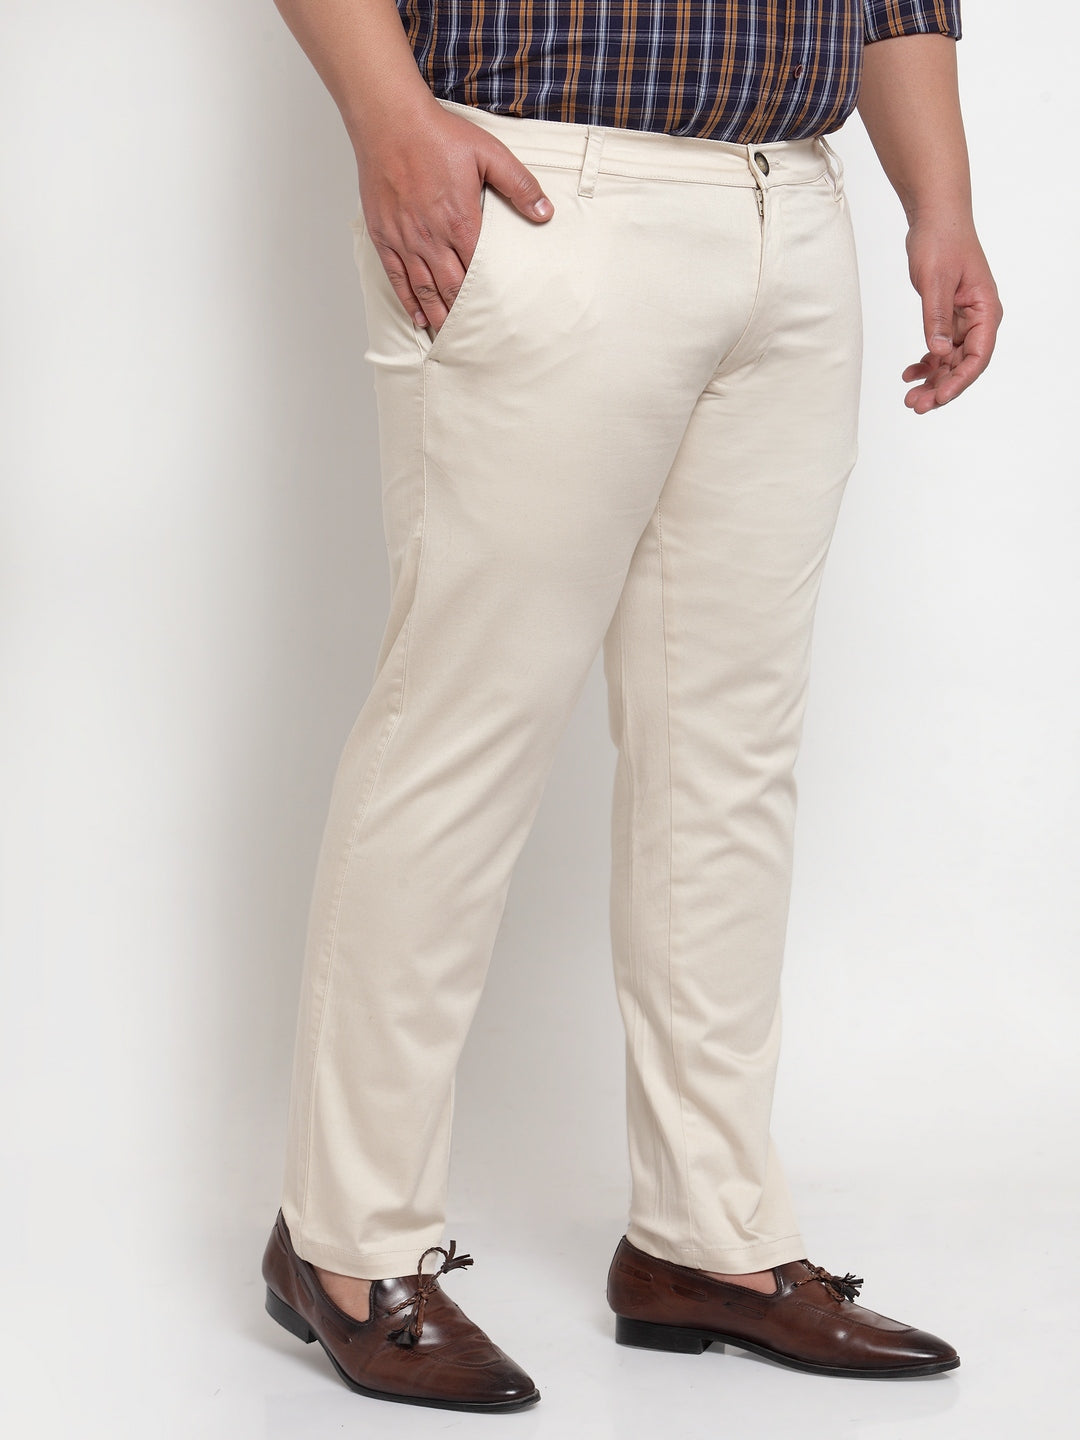 Jeans & Trousers | Beige Colour Classy High Waisted Trouser Pant 👌👌With  Belt | Freeup